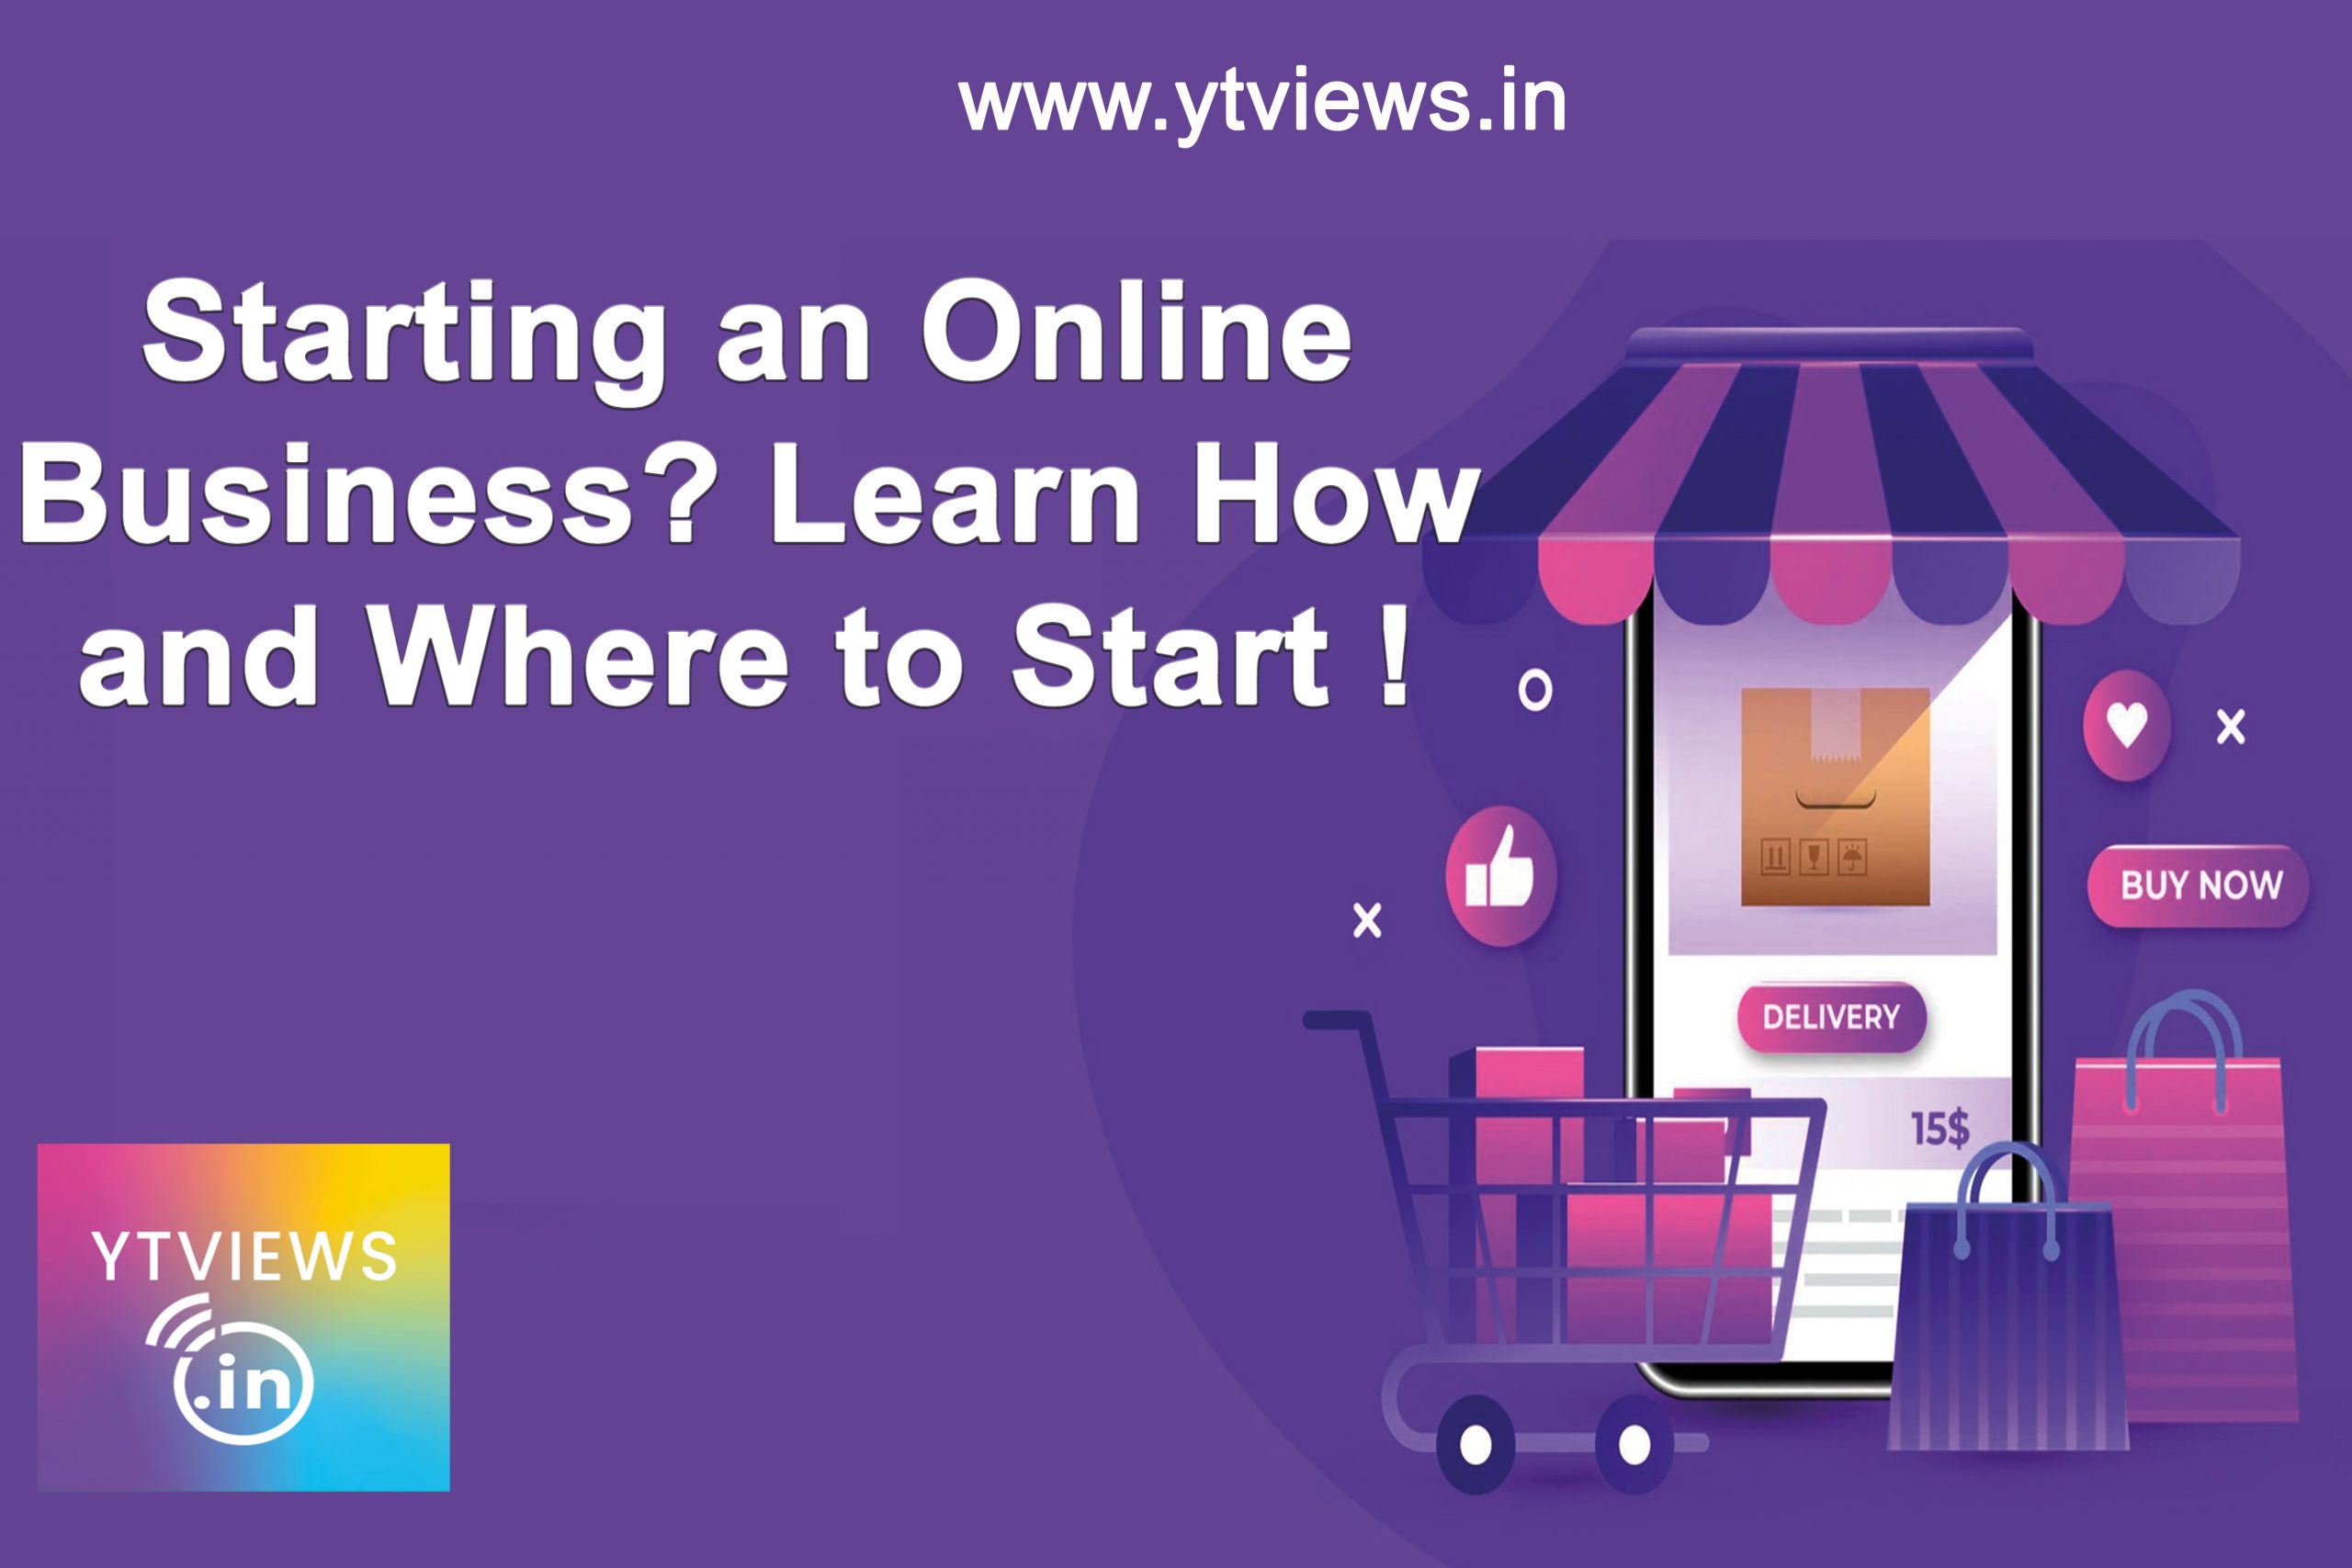 Starting an Online Business? Learn How and Where to Start!